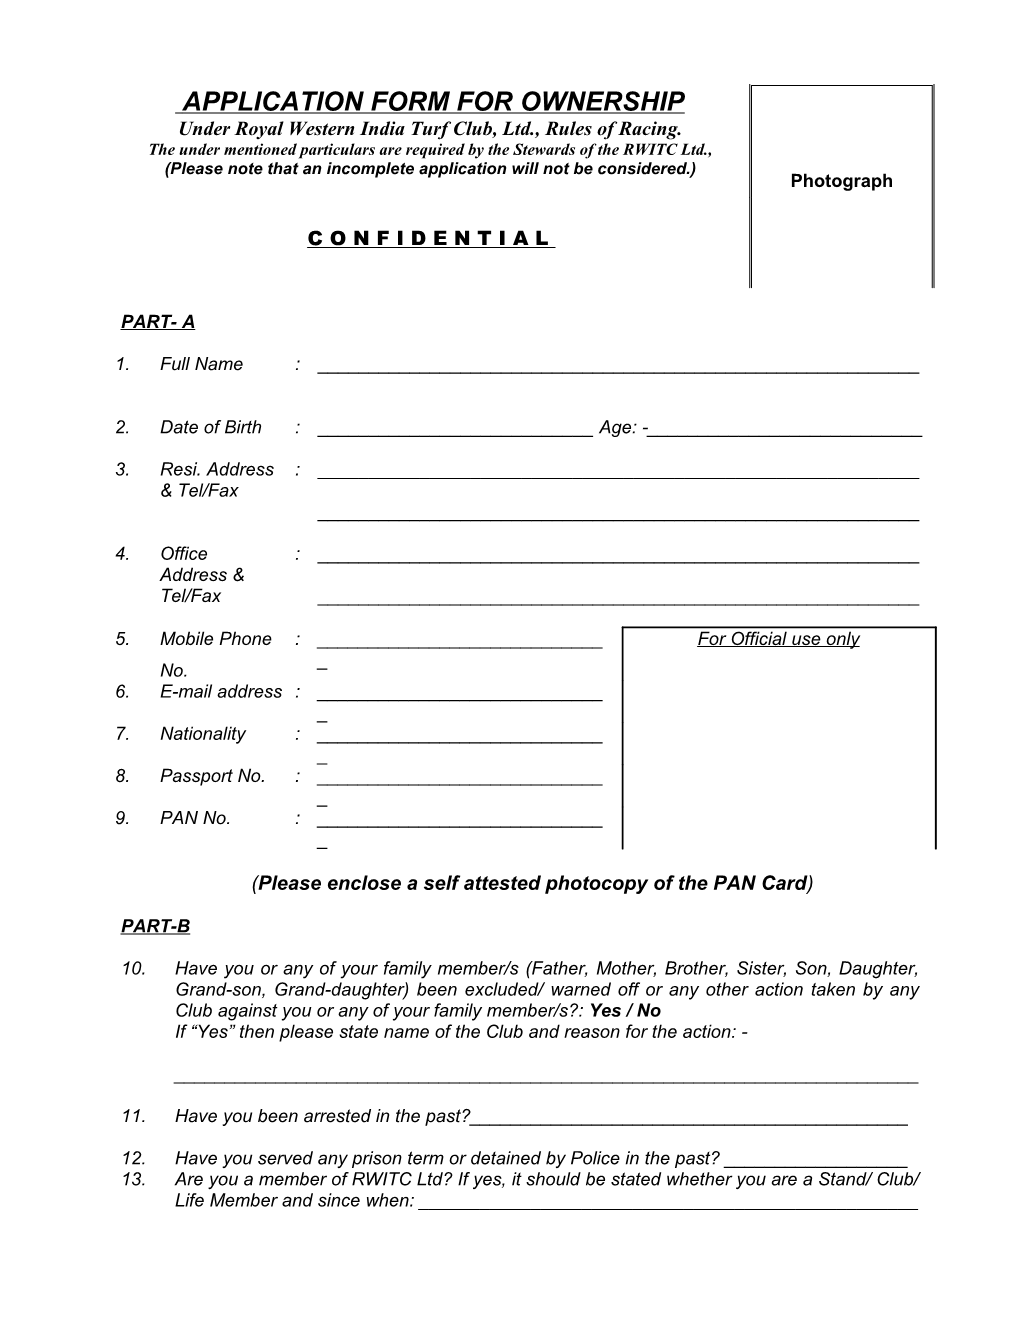 Application Form for Ownership